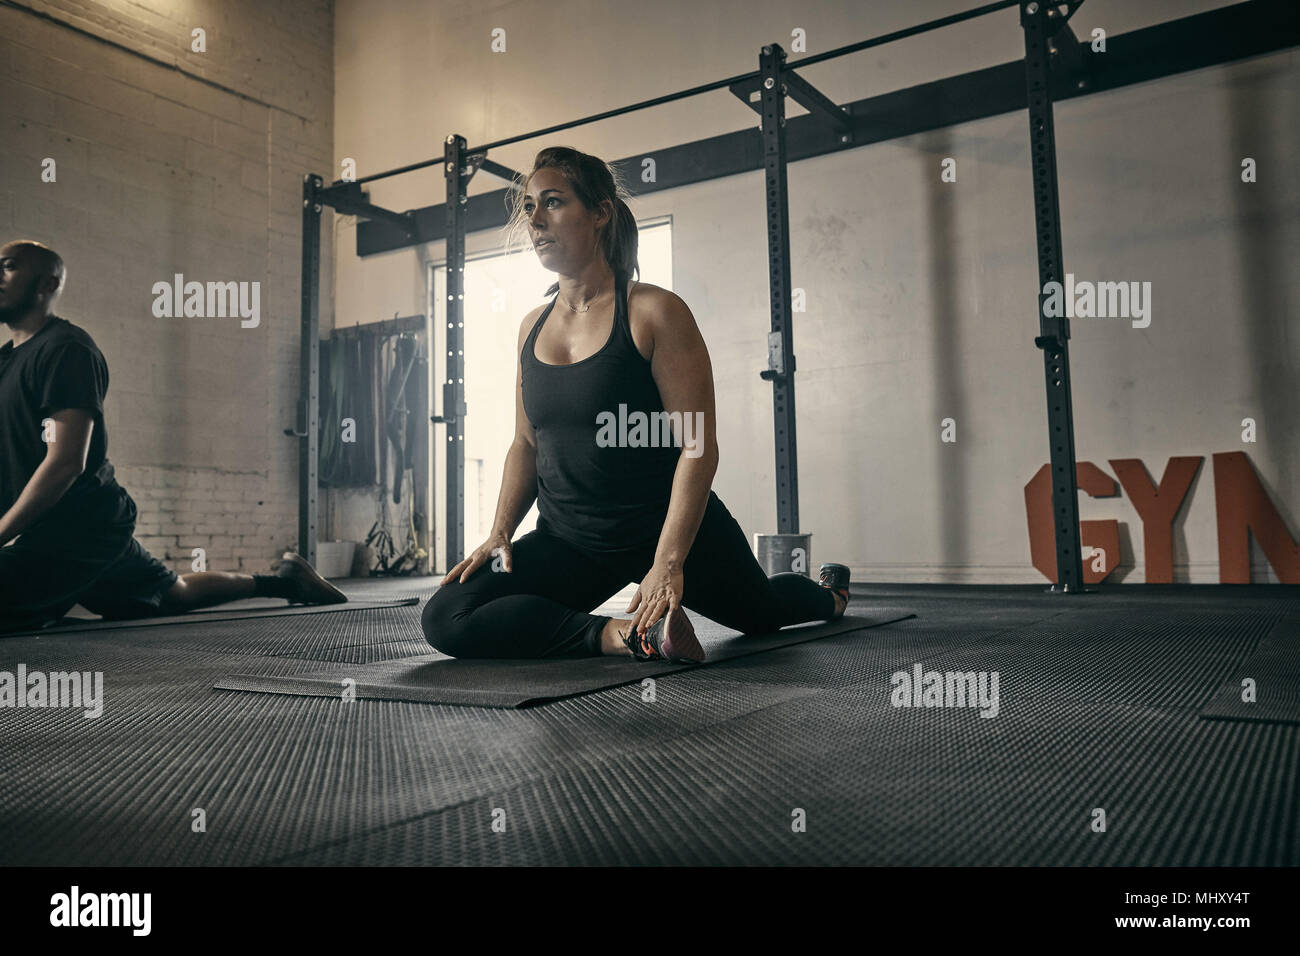 Woman in yoga position in gym Stock Photo